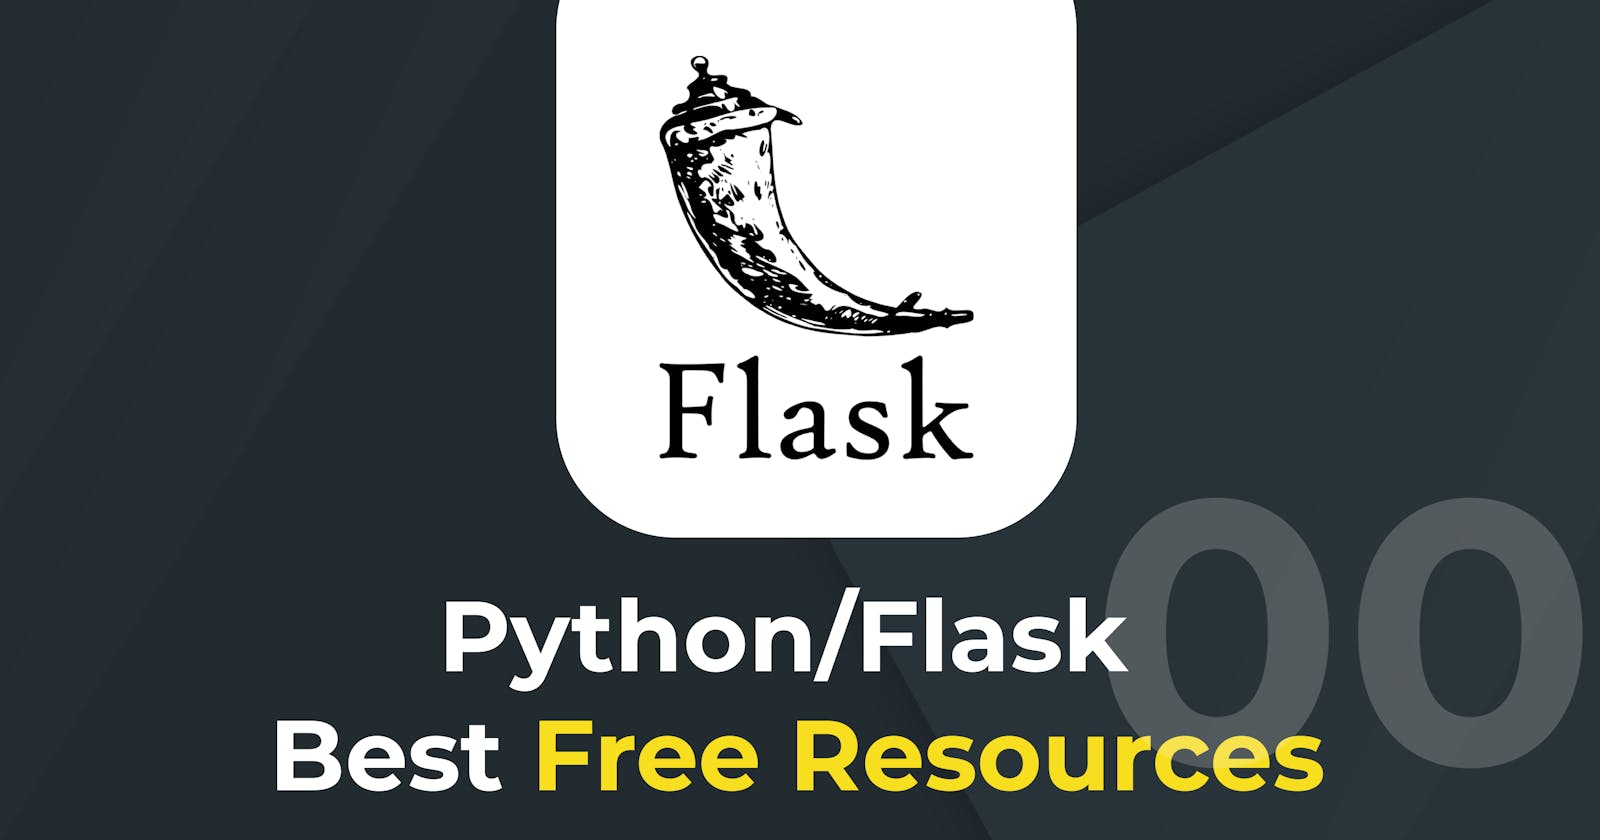 Amazing Flask Resources FOR FREE!